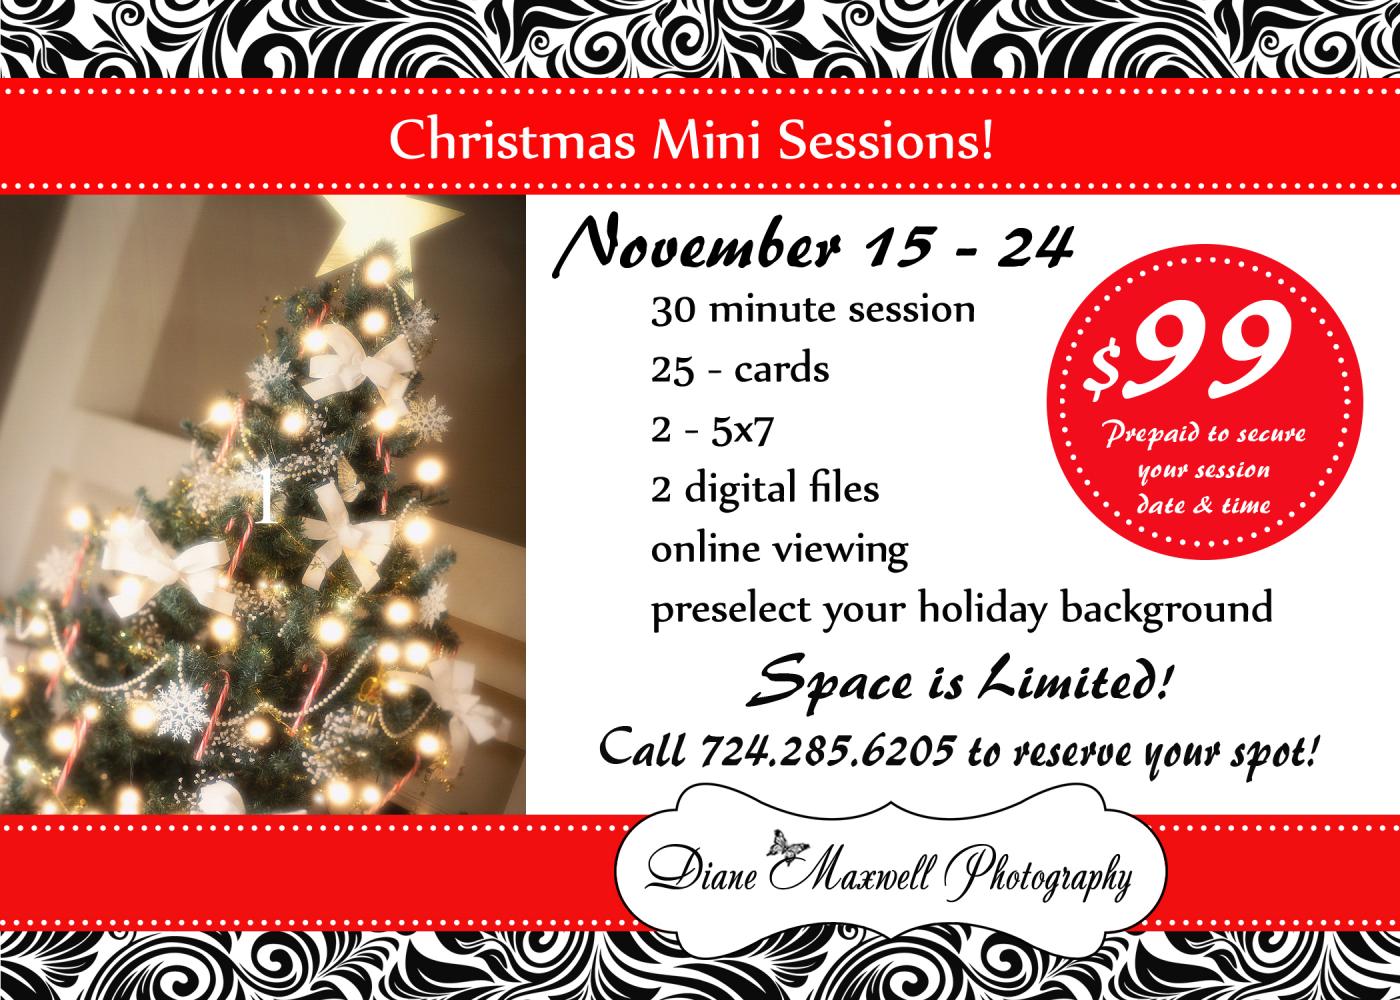 Christmas Mini Sessions from November 15 - 24